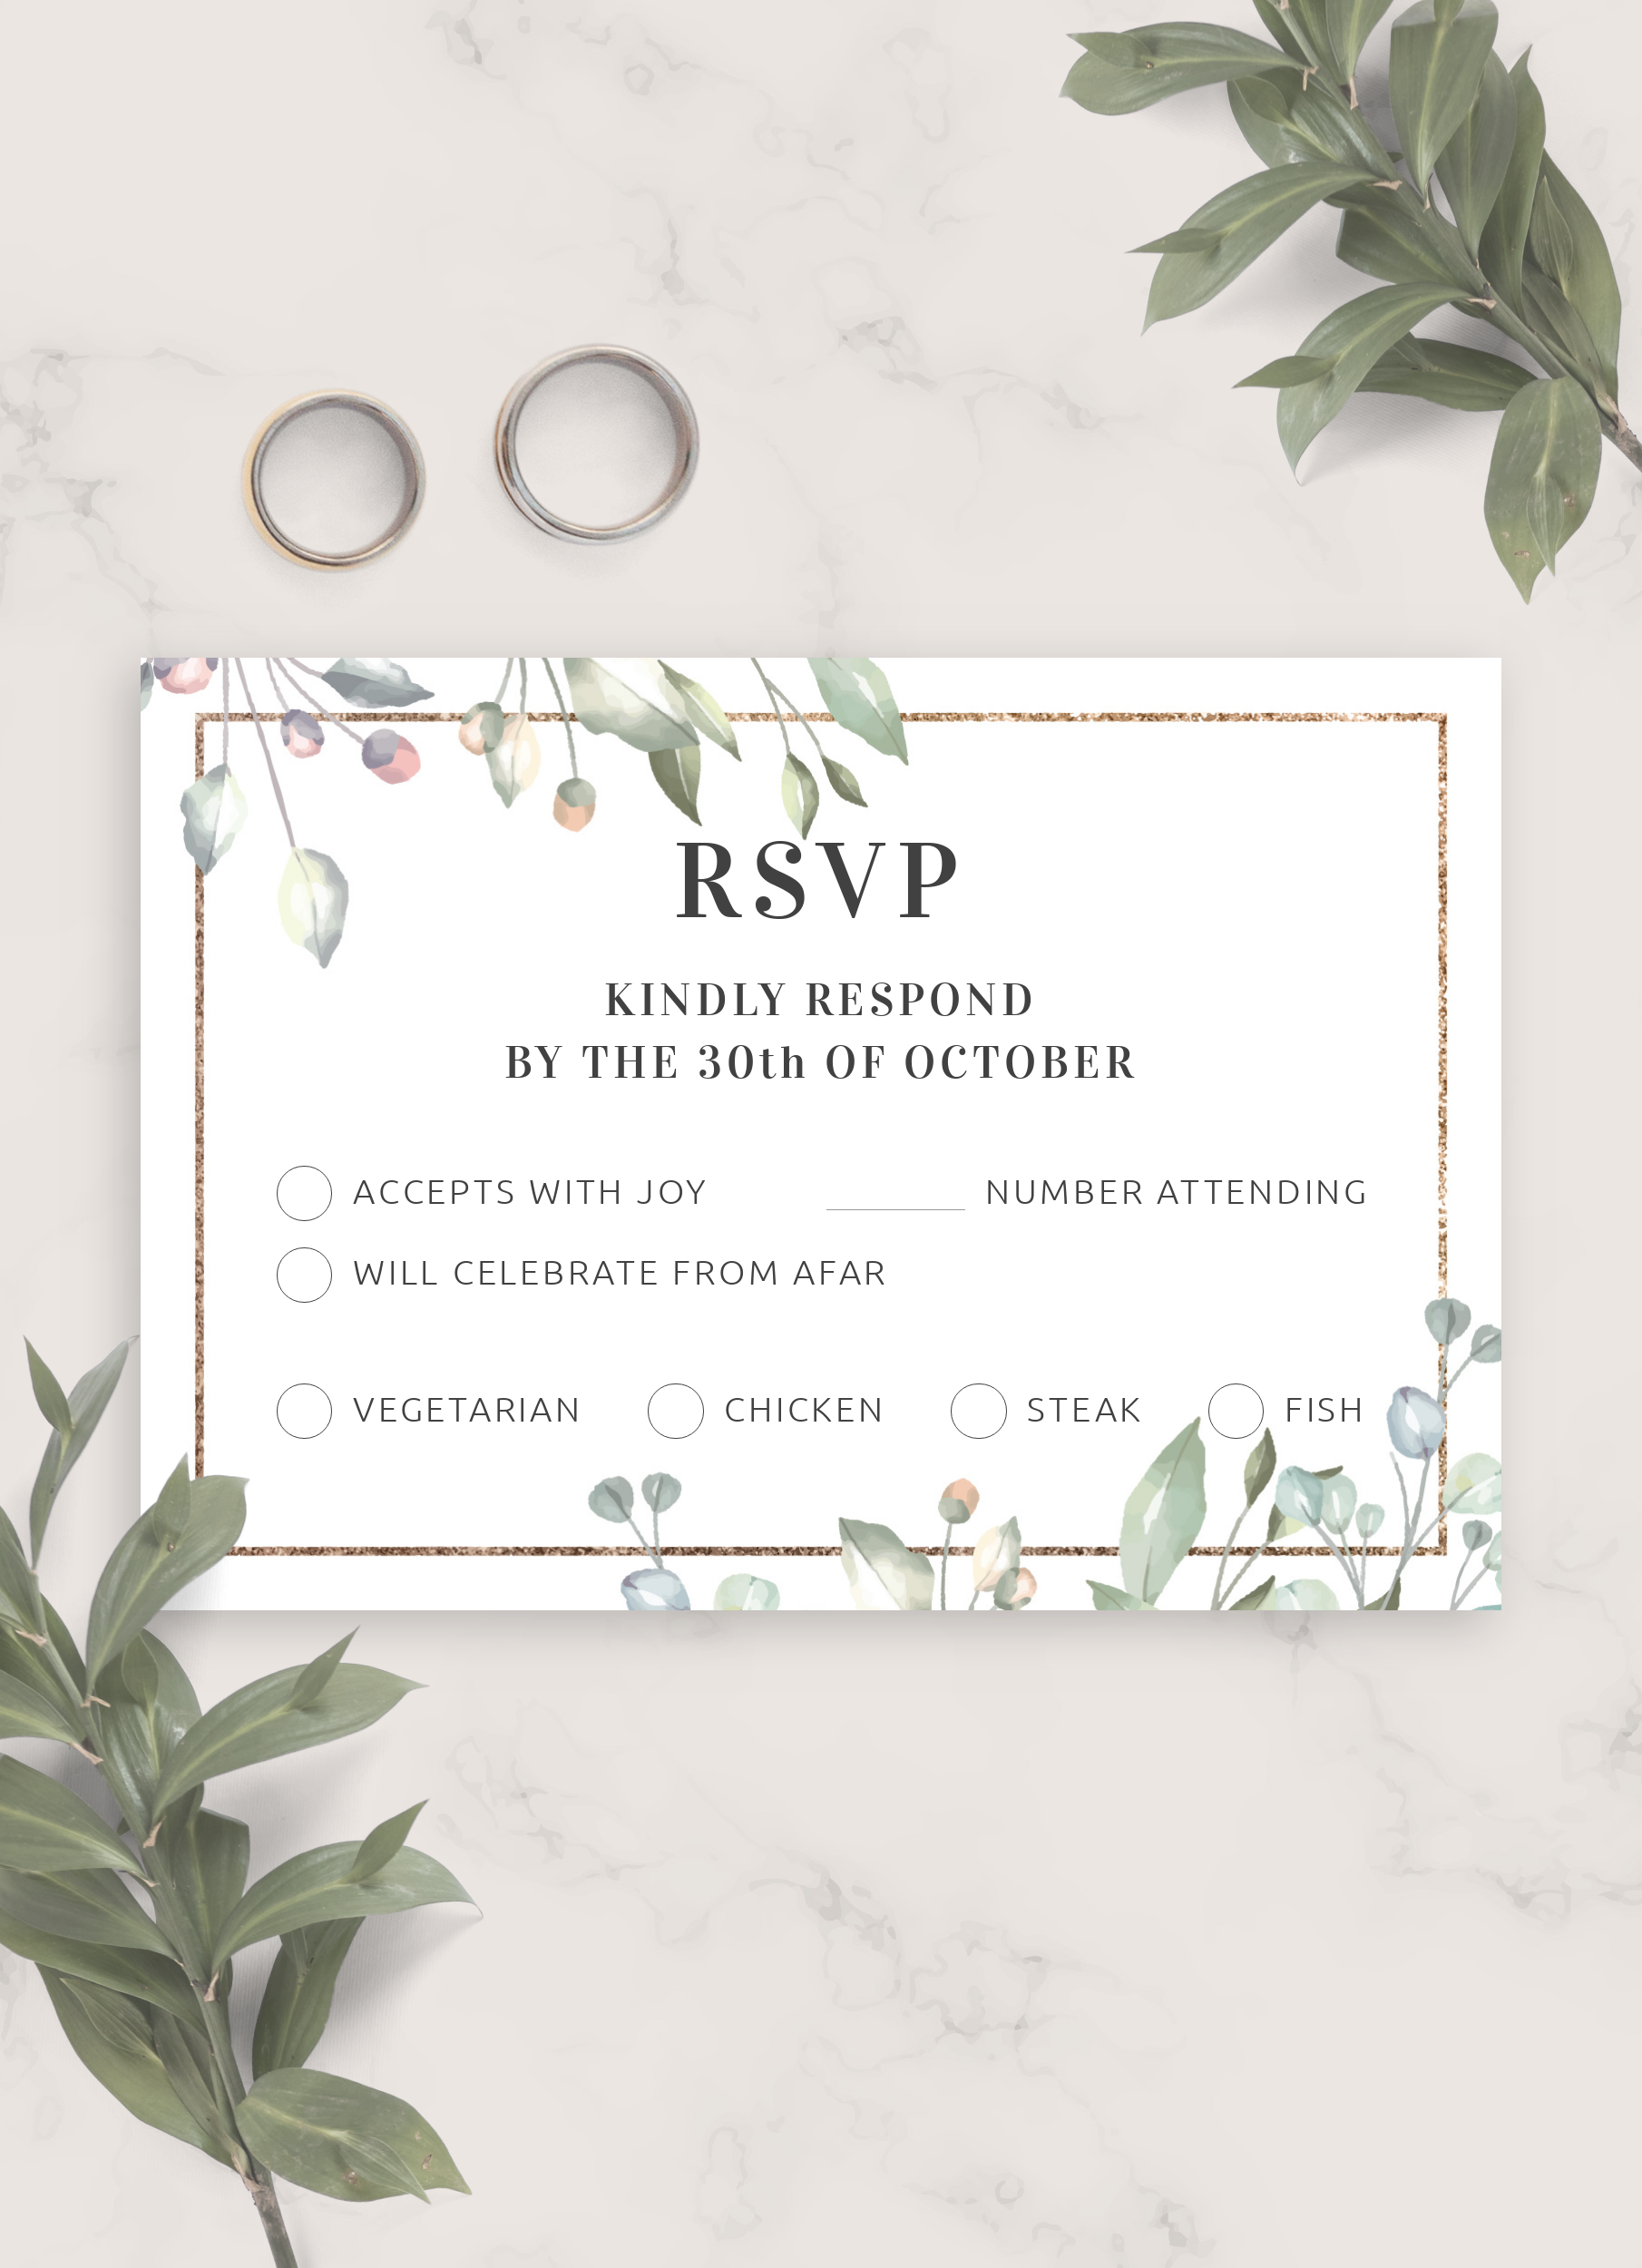 greenery-rsvp-card-with-qr-code-wedding-rsvp-qr-code-scan-to-rsvp